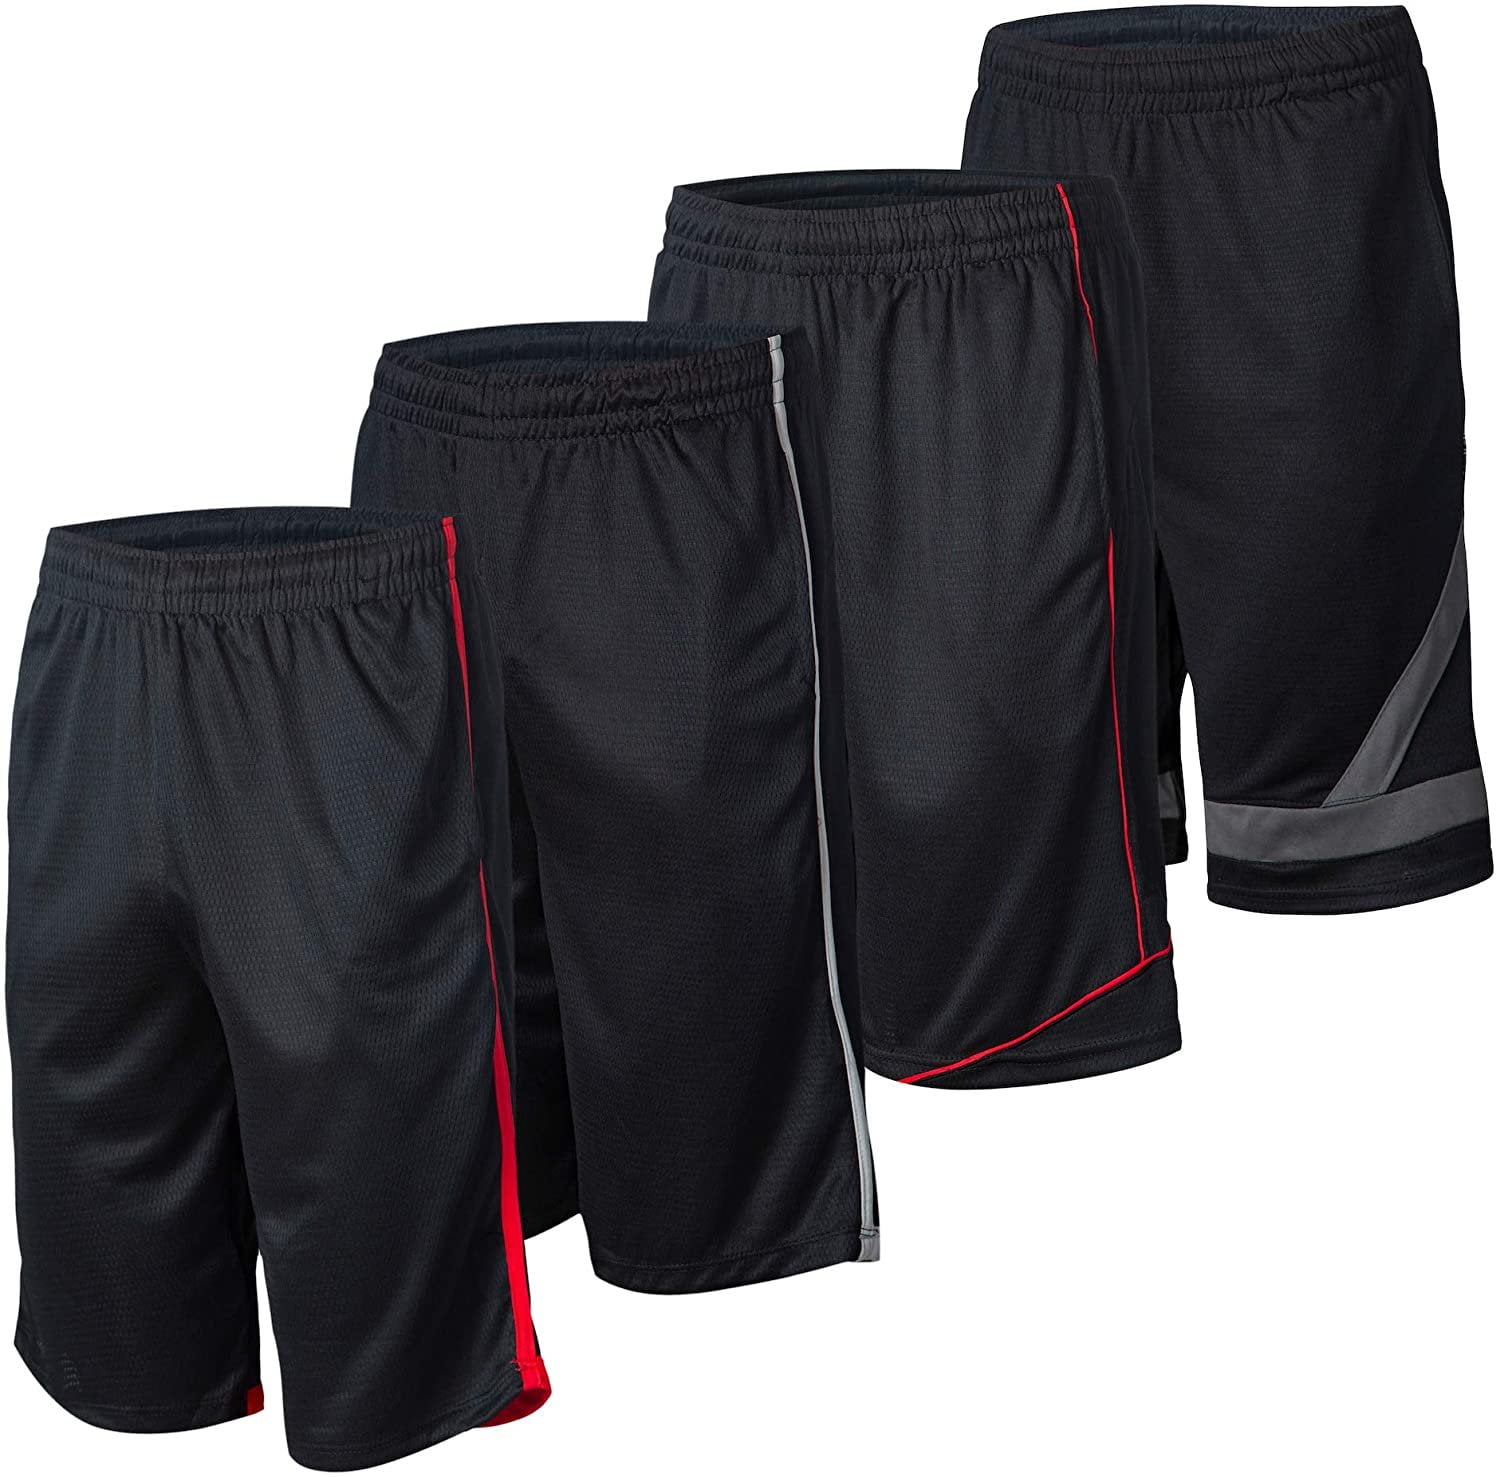 4 Pack: Men's Active Performance Athletic Workout Sports Gym Running ...